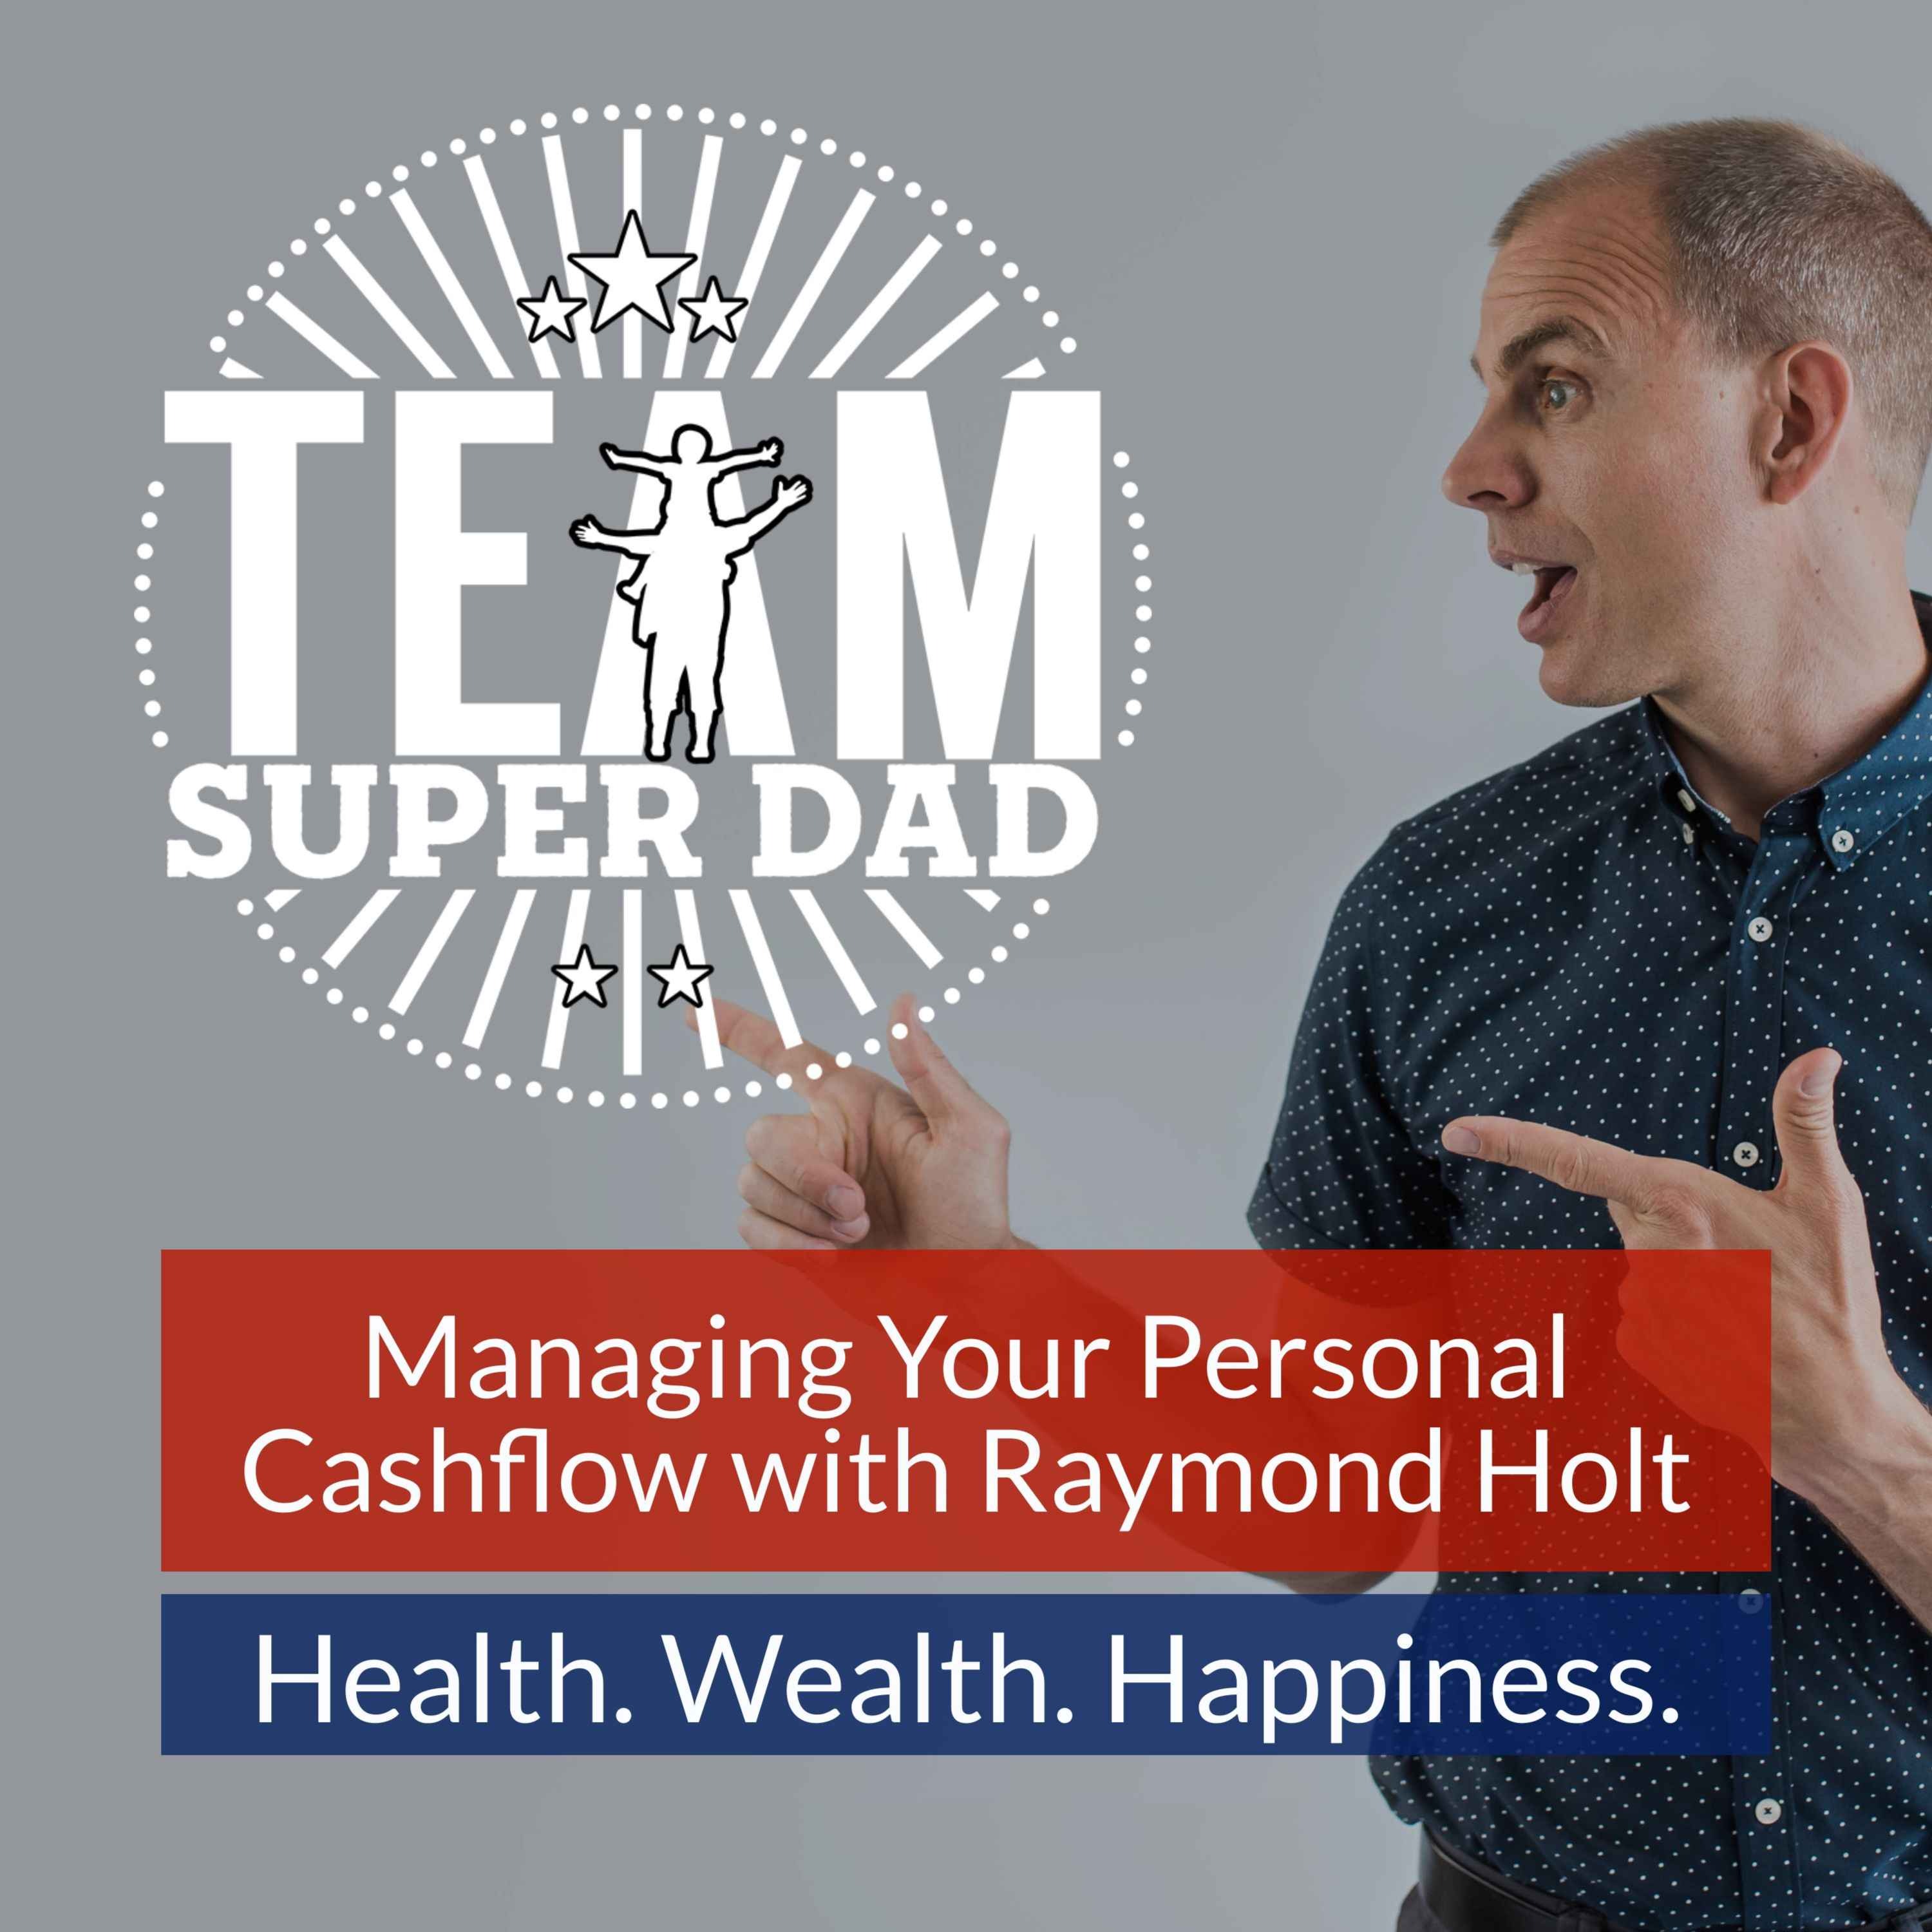 Managing Your Personal Cashflow with Raymond Holt